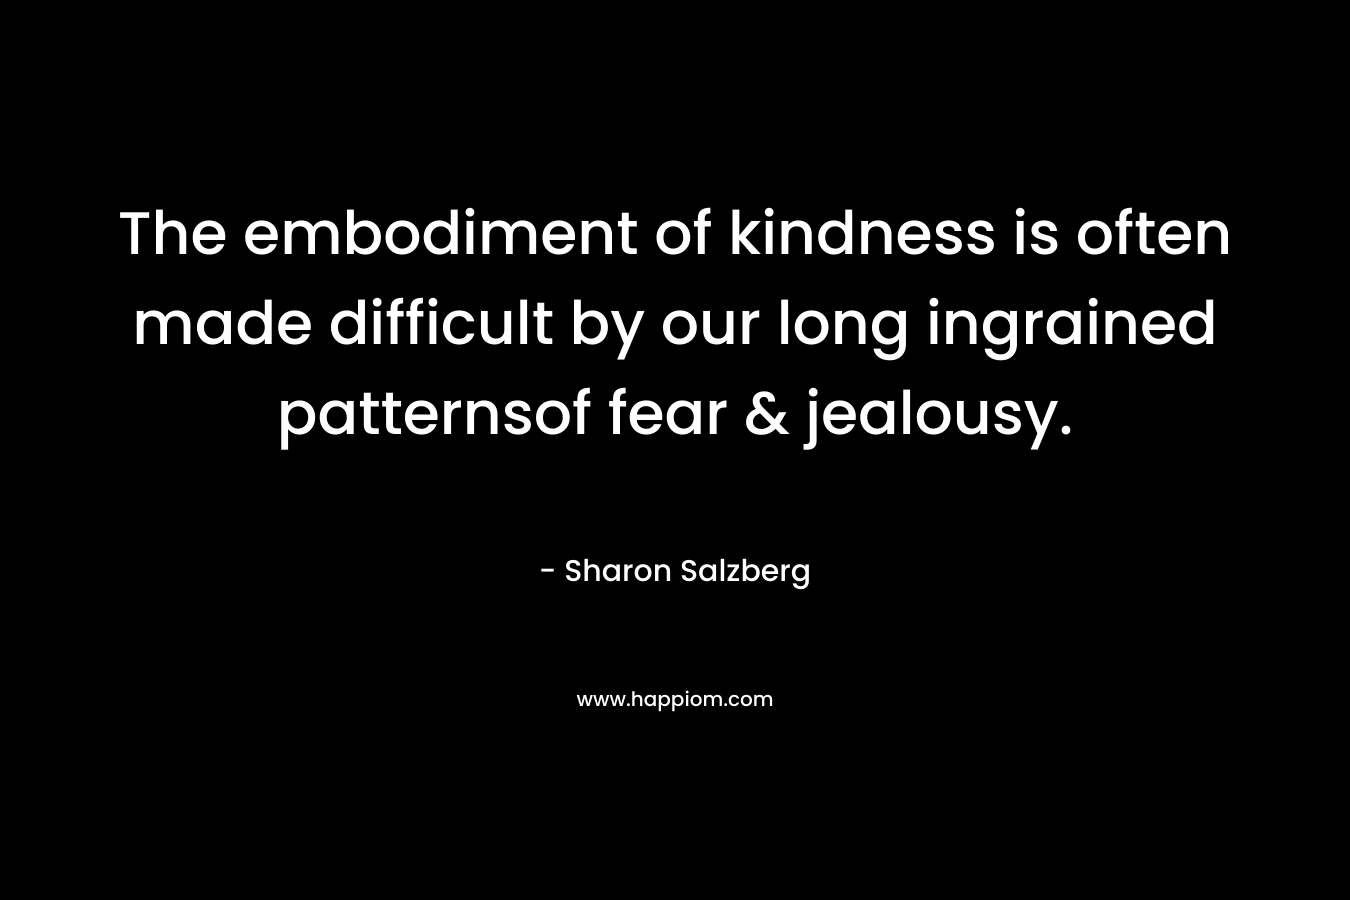 The embodiment of kindness is often made difficult by our long ingrained patternsof fear & jealousy. – Sharon Salzberg